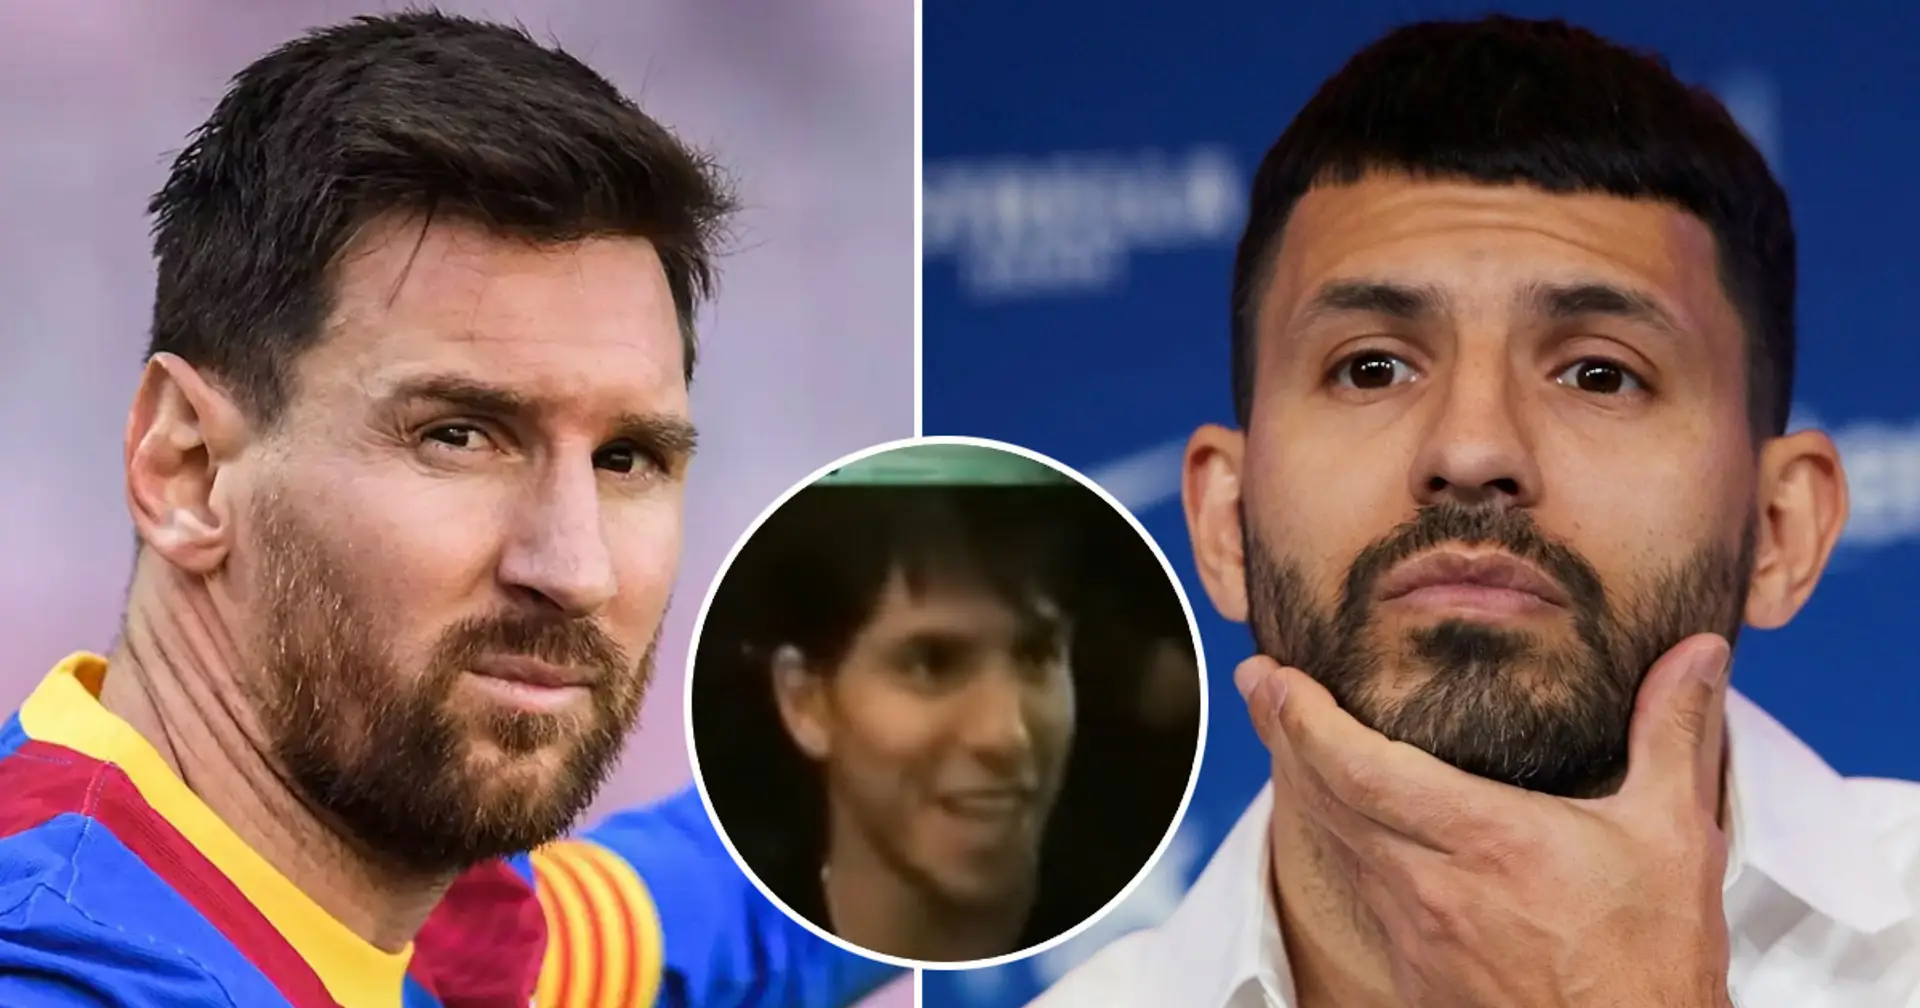 Aguero reportedly wants to leave Barca after Messi exit, he once said it would be 'dream' to play for Liverpool